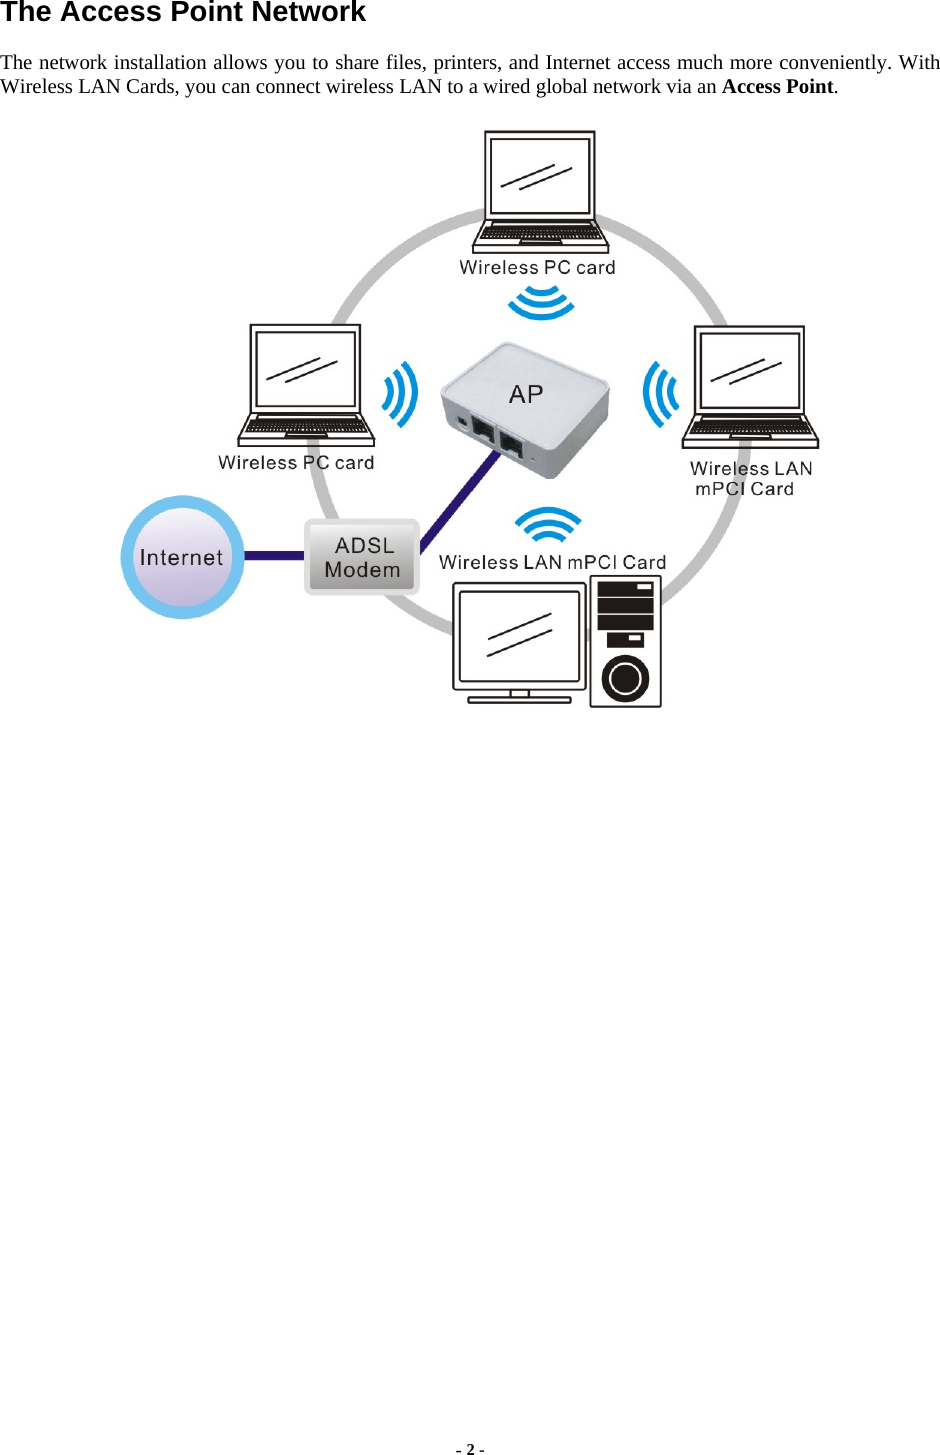  - 2 -  The Access Point Network The network installation allows you to share files, printers, and Internet access much more conveniently. With Wireless LAN Cards, you can connect wireless LAN to a wired global network via an Access Point.  